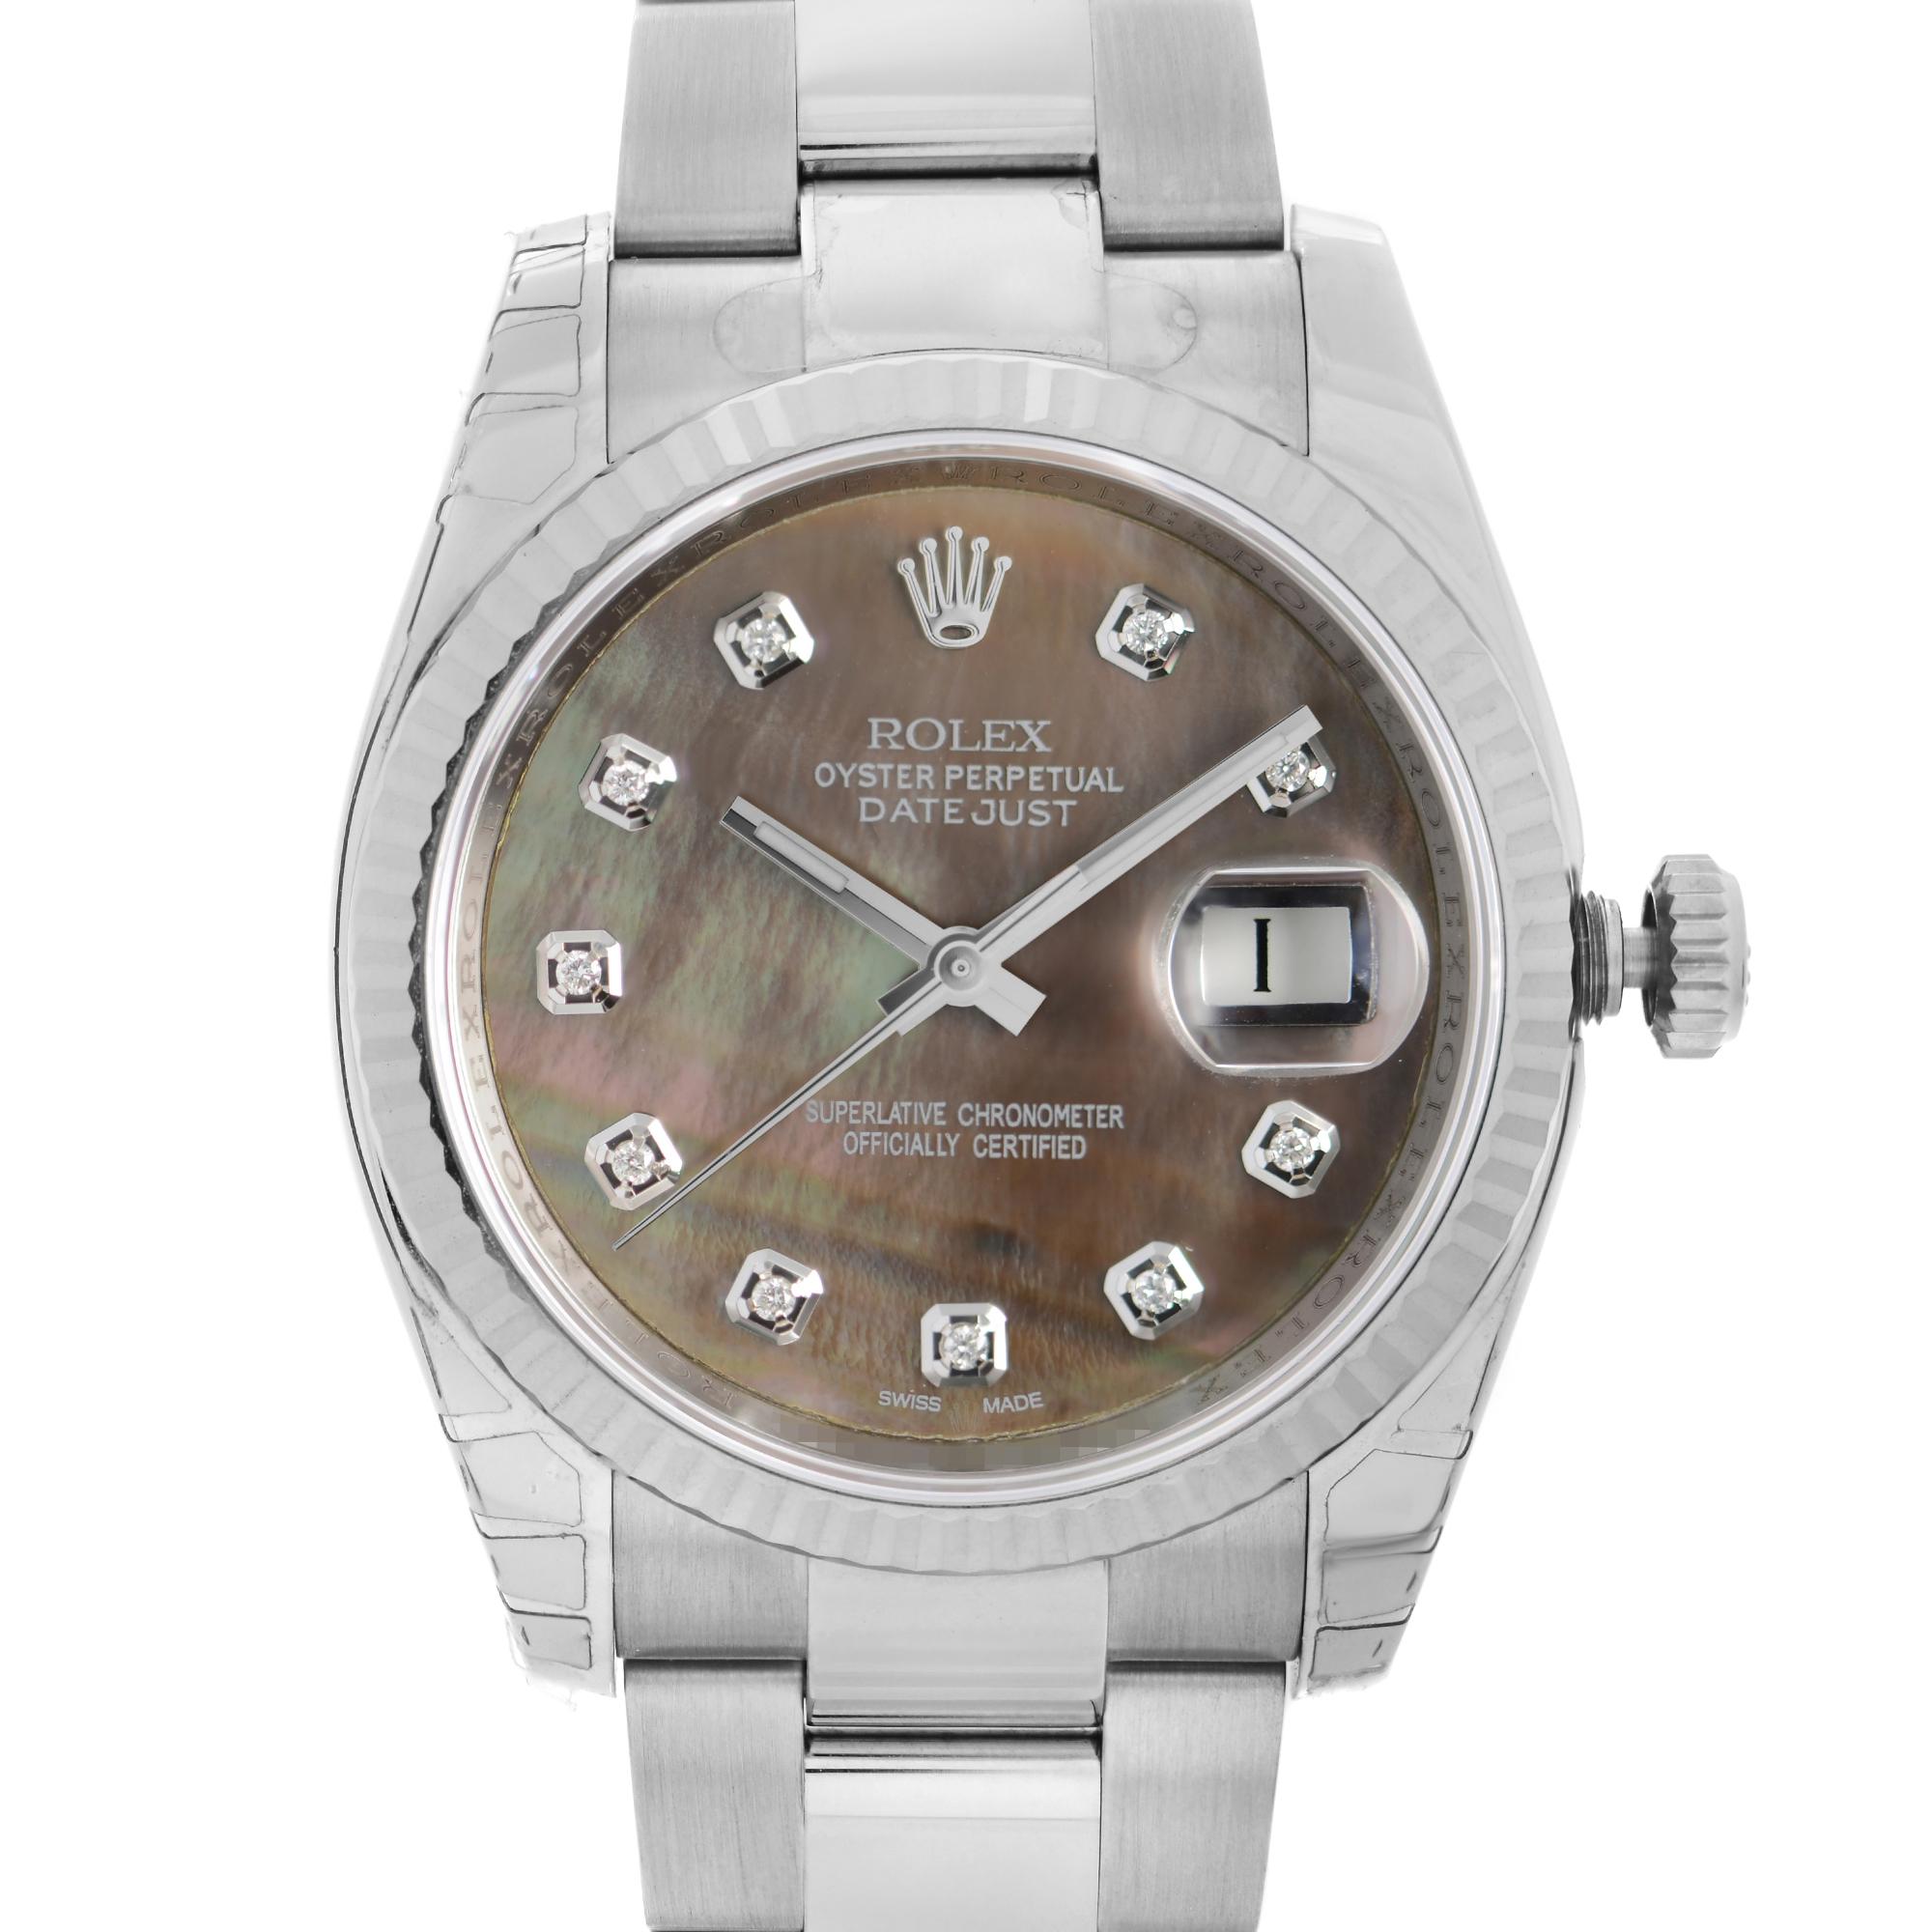 Pre Owned Rolex Datejust 36mm Steel Custom Black Mother Of Pearl Diamond Dial Automatic Watch 116234. This Beautiful Timepiece is Powered by Mechanical (Automatic) Movement And Features: Round Stainless Steel Case and Bracelet, Fixed Fluted 18k